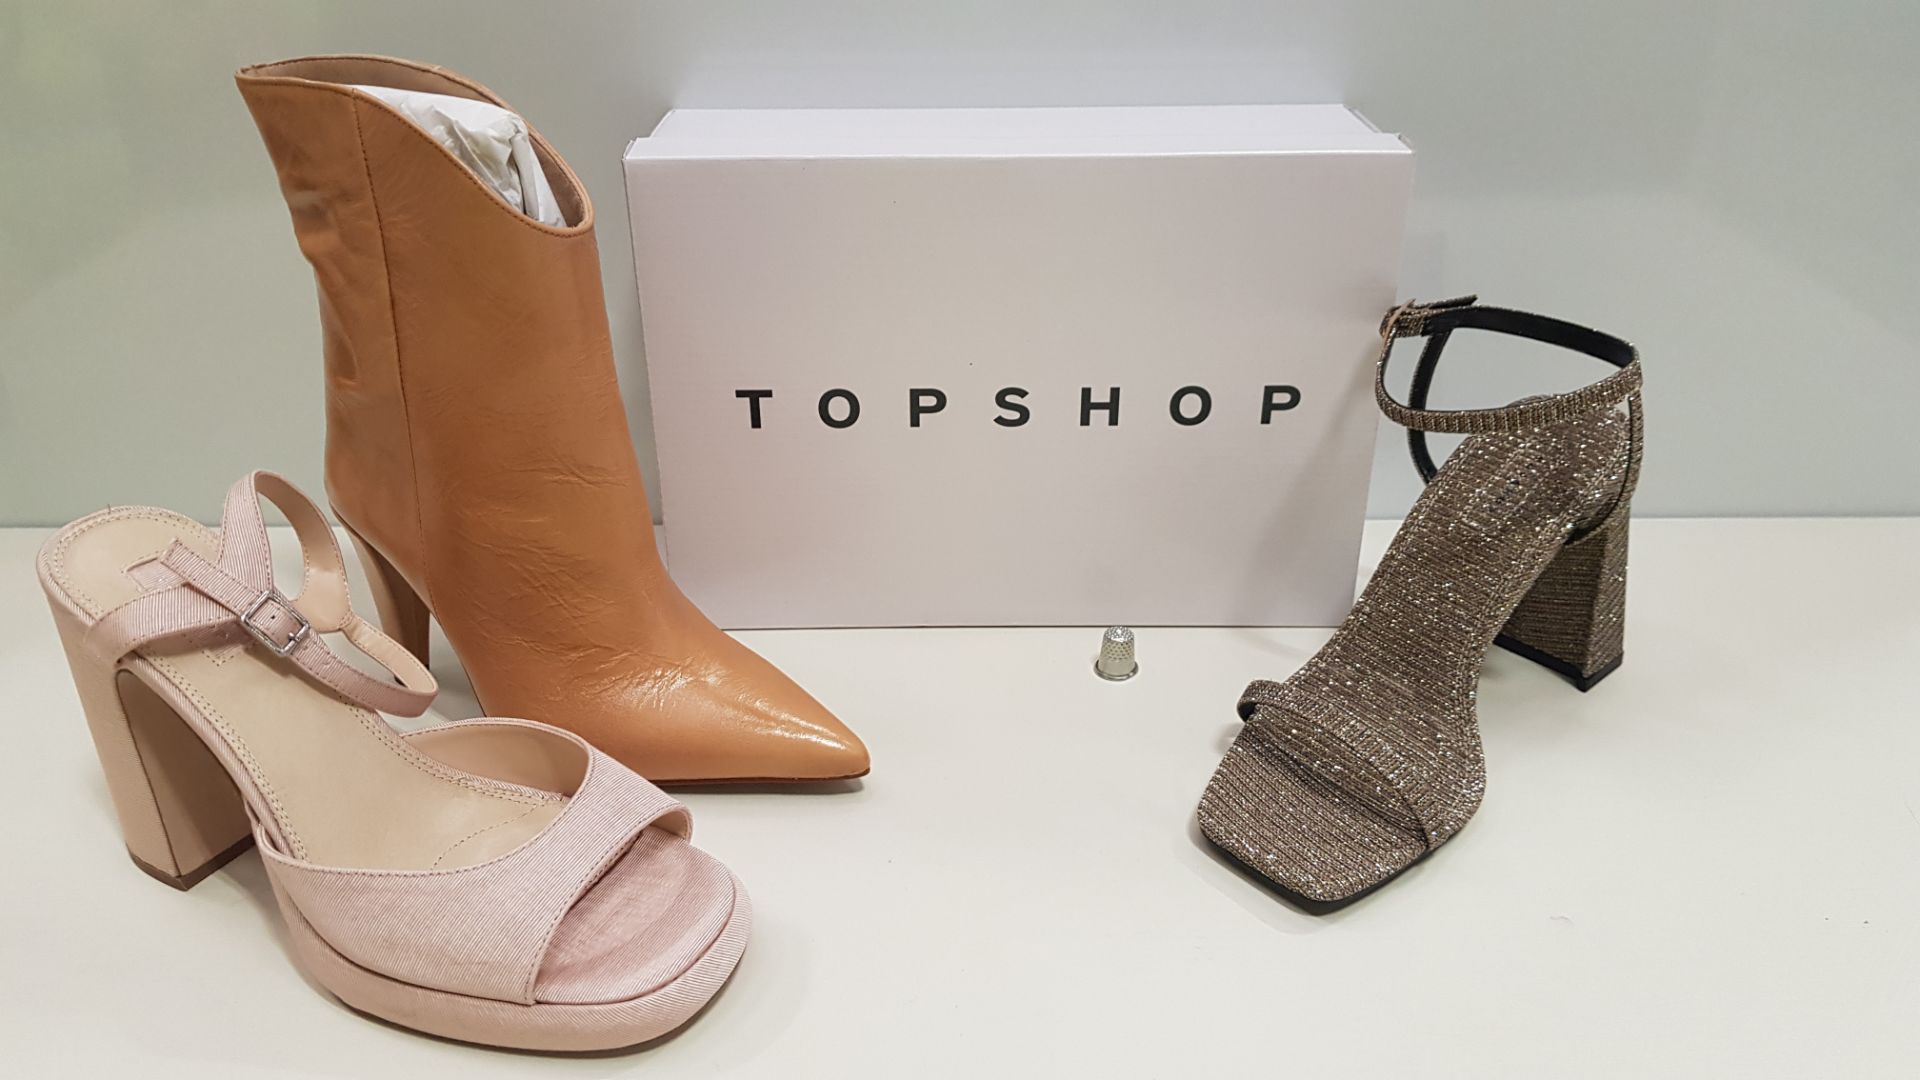 14 X BRAND NEW TOPSHOP SHOES -BRAND NEW ROCCO GOLD HEELS, PINK RENO HEELED SHOES AND NATURAL MAGIC